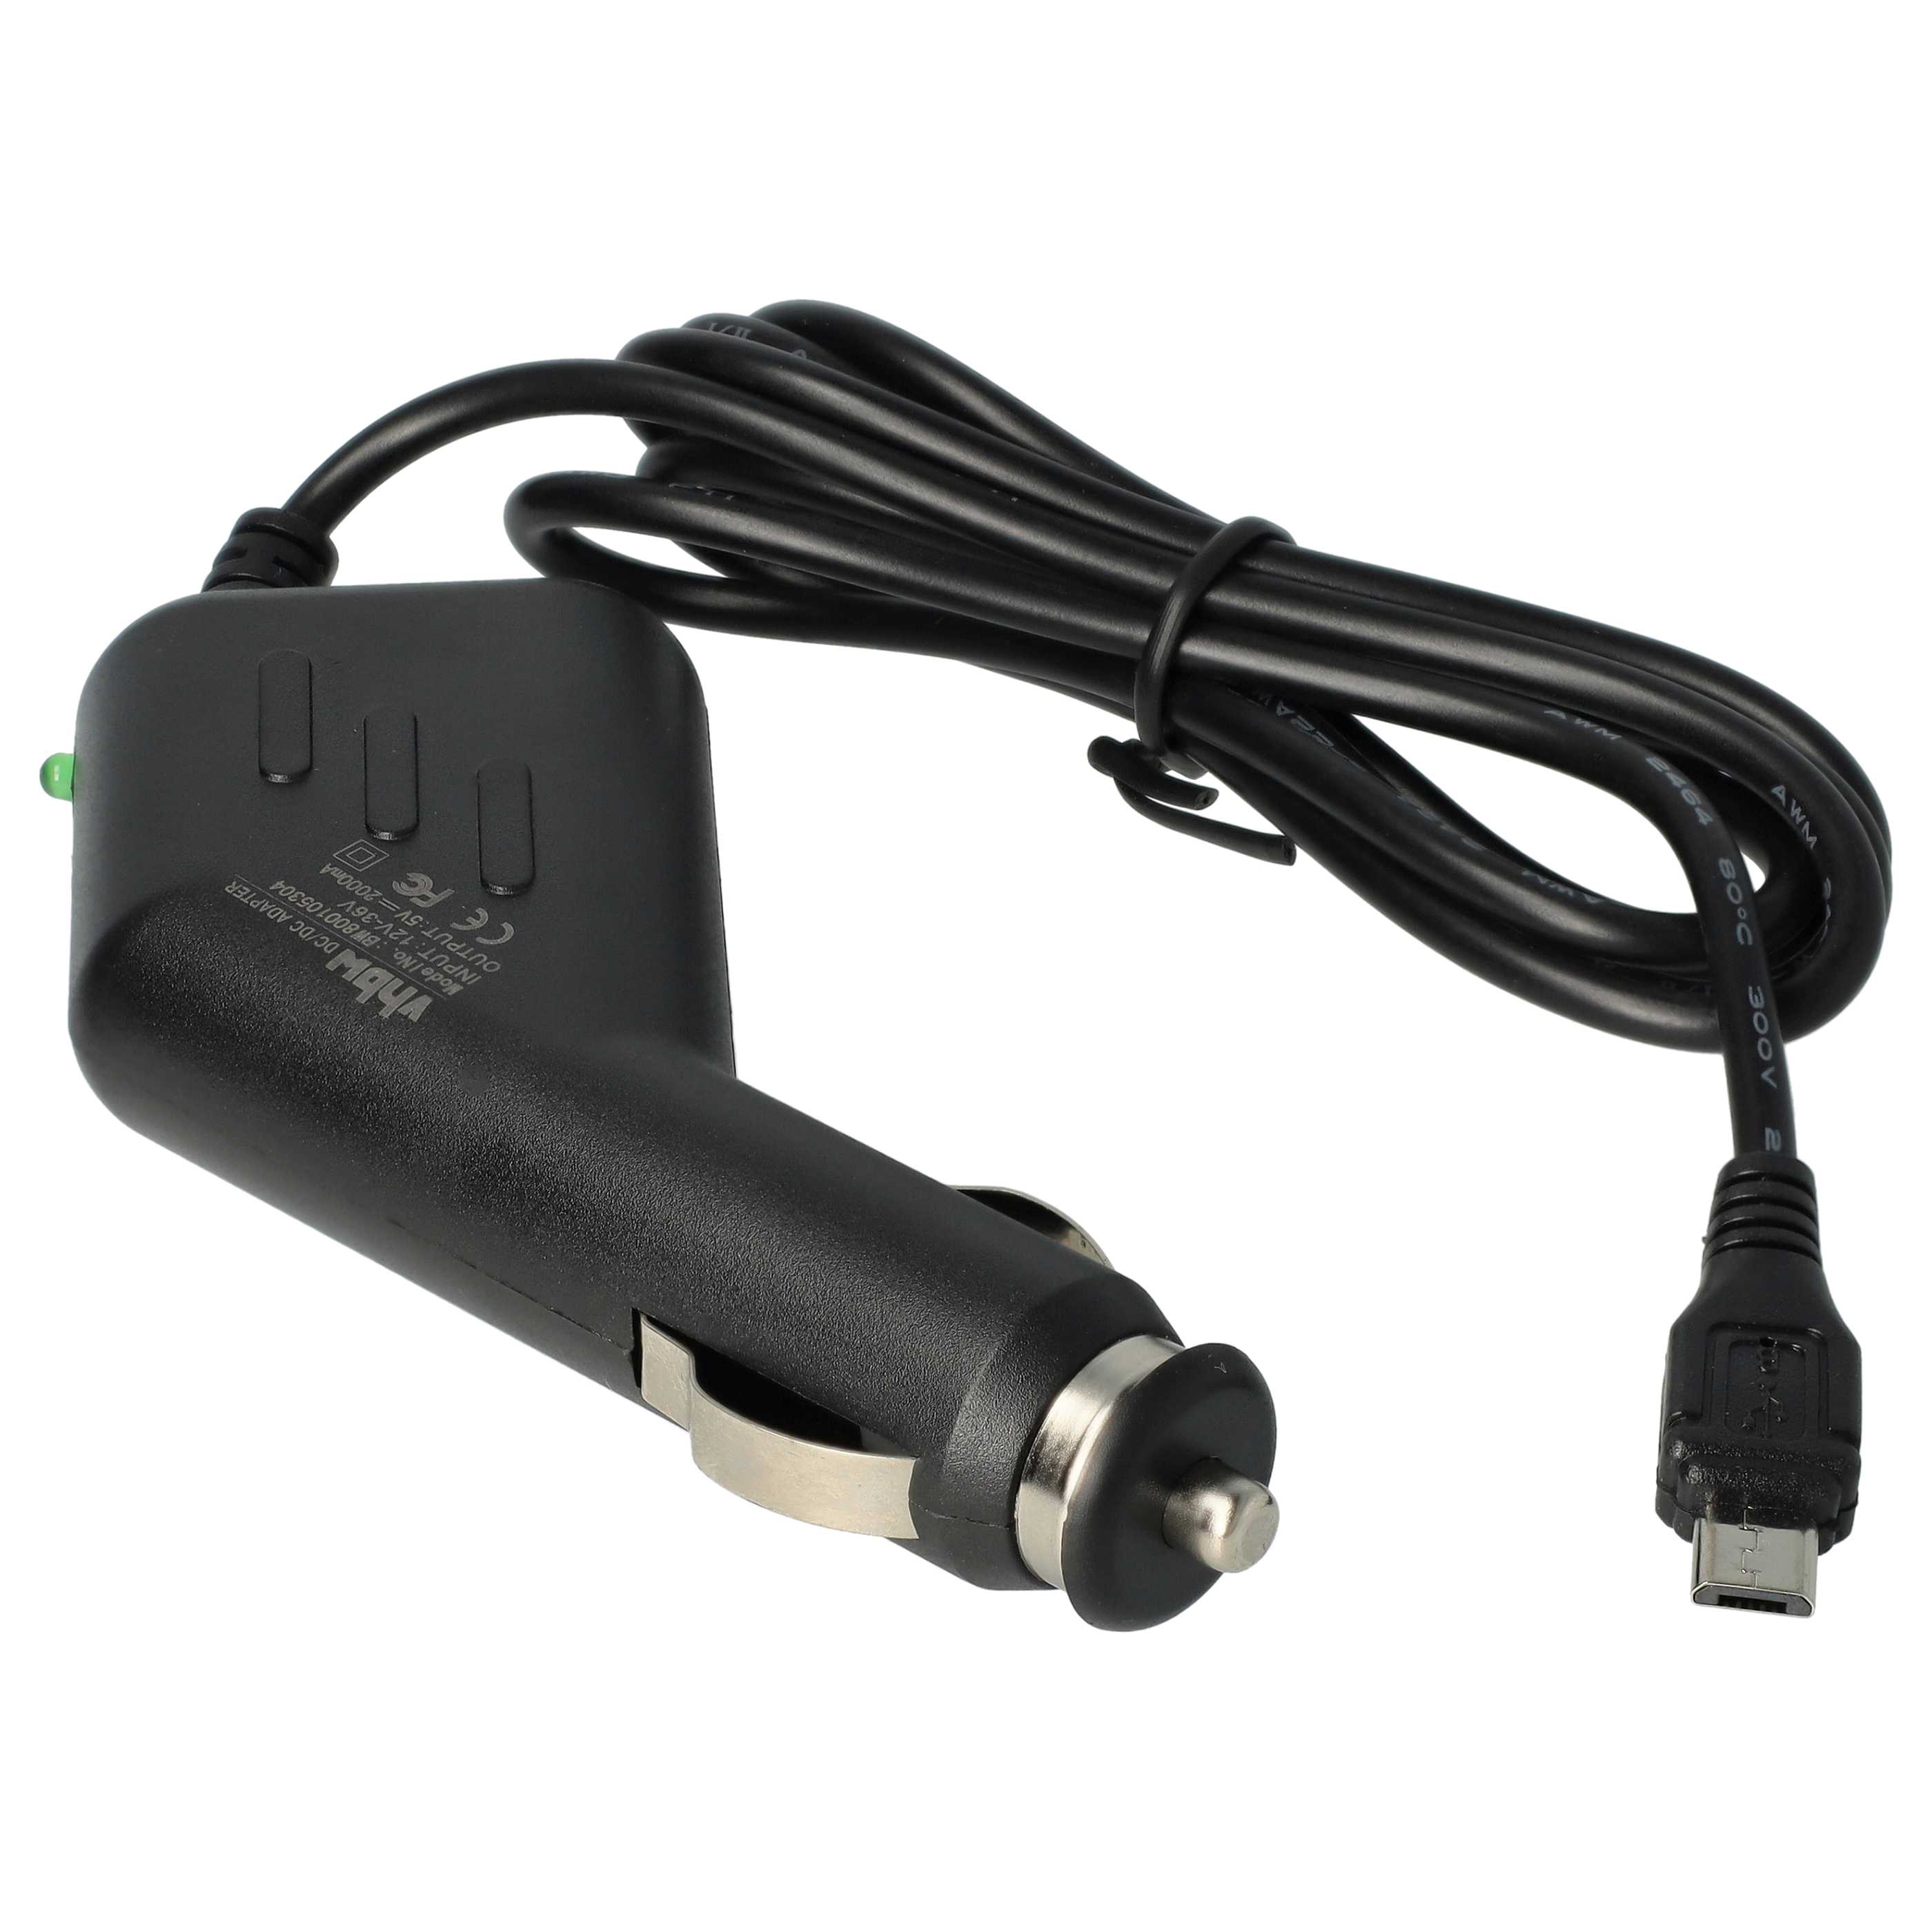 Chargeur voiture micro-USB 2,0 A pour smartphone, GPS Olympia et autres - allume-cigare